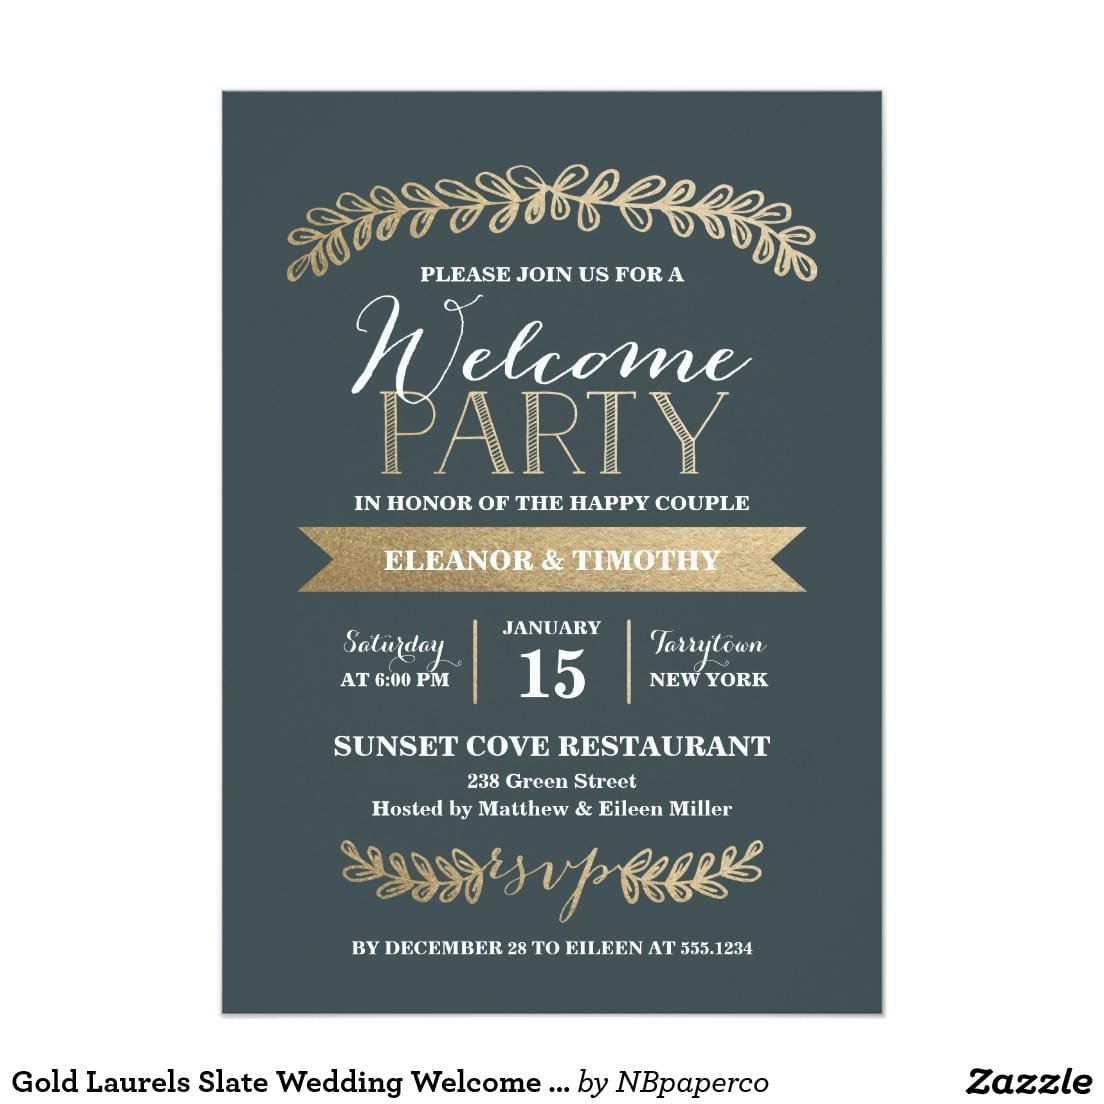 Gold Laurels Slate Wedding Welcome Party Invite